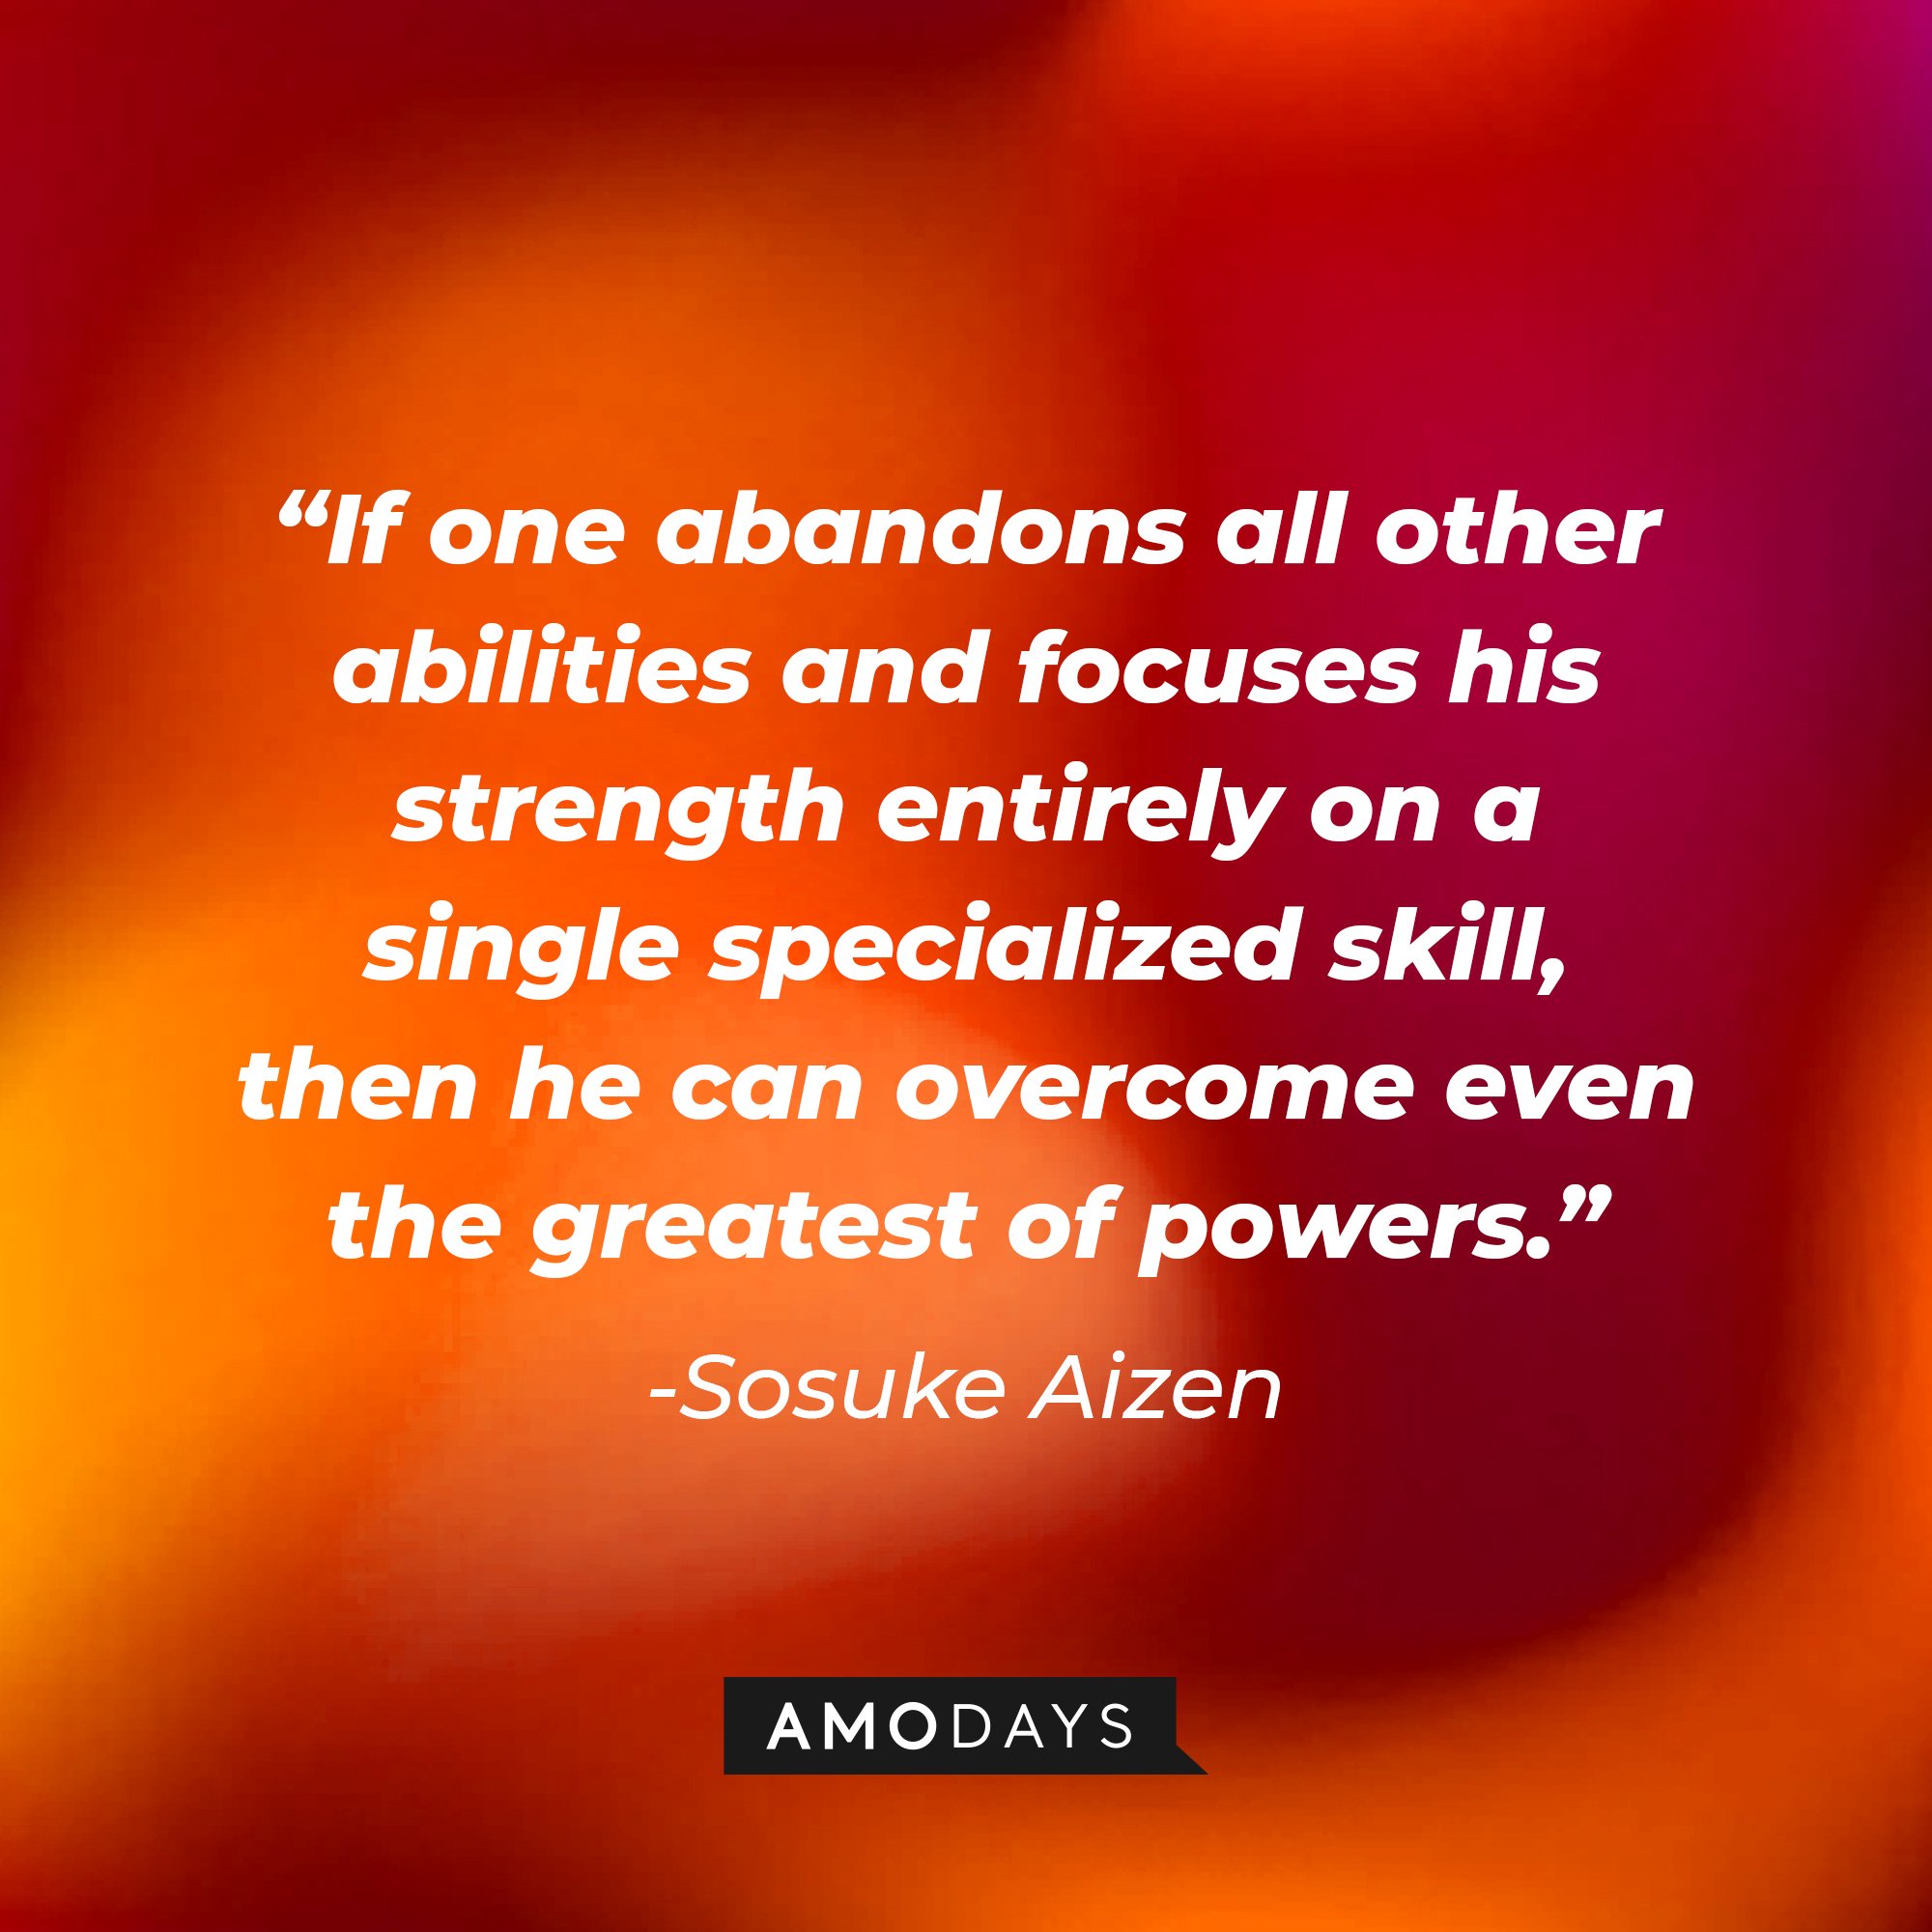 Sosuke Aizen's quote: "If one abandons all other abilities and focuses his strength entirely on a single specialized skill, then he can overcome even the greatest of powers." | Image: AmoDays